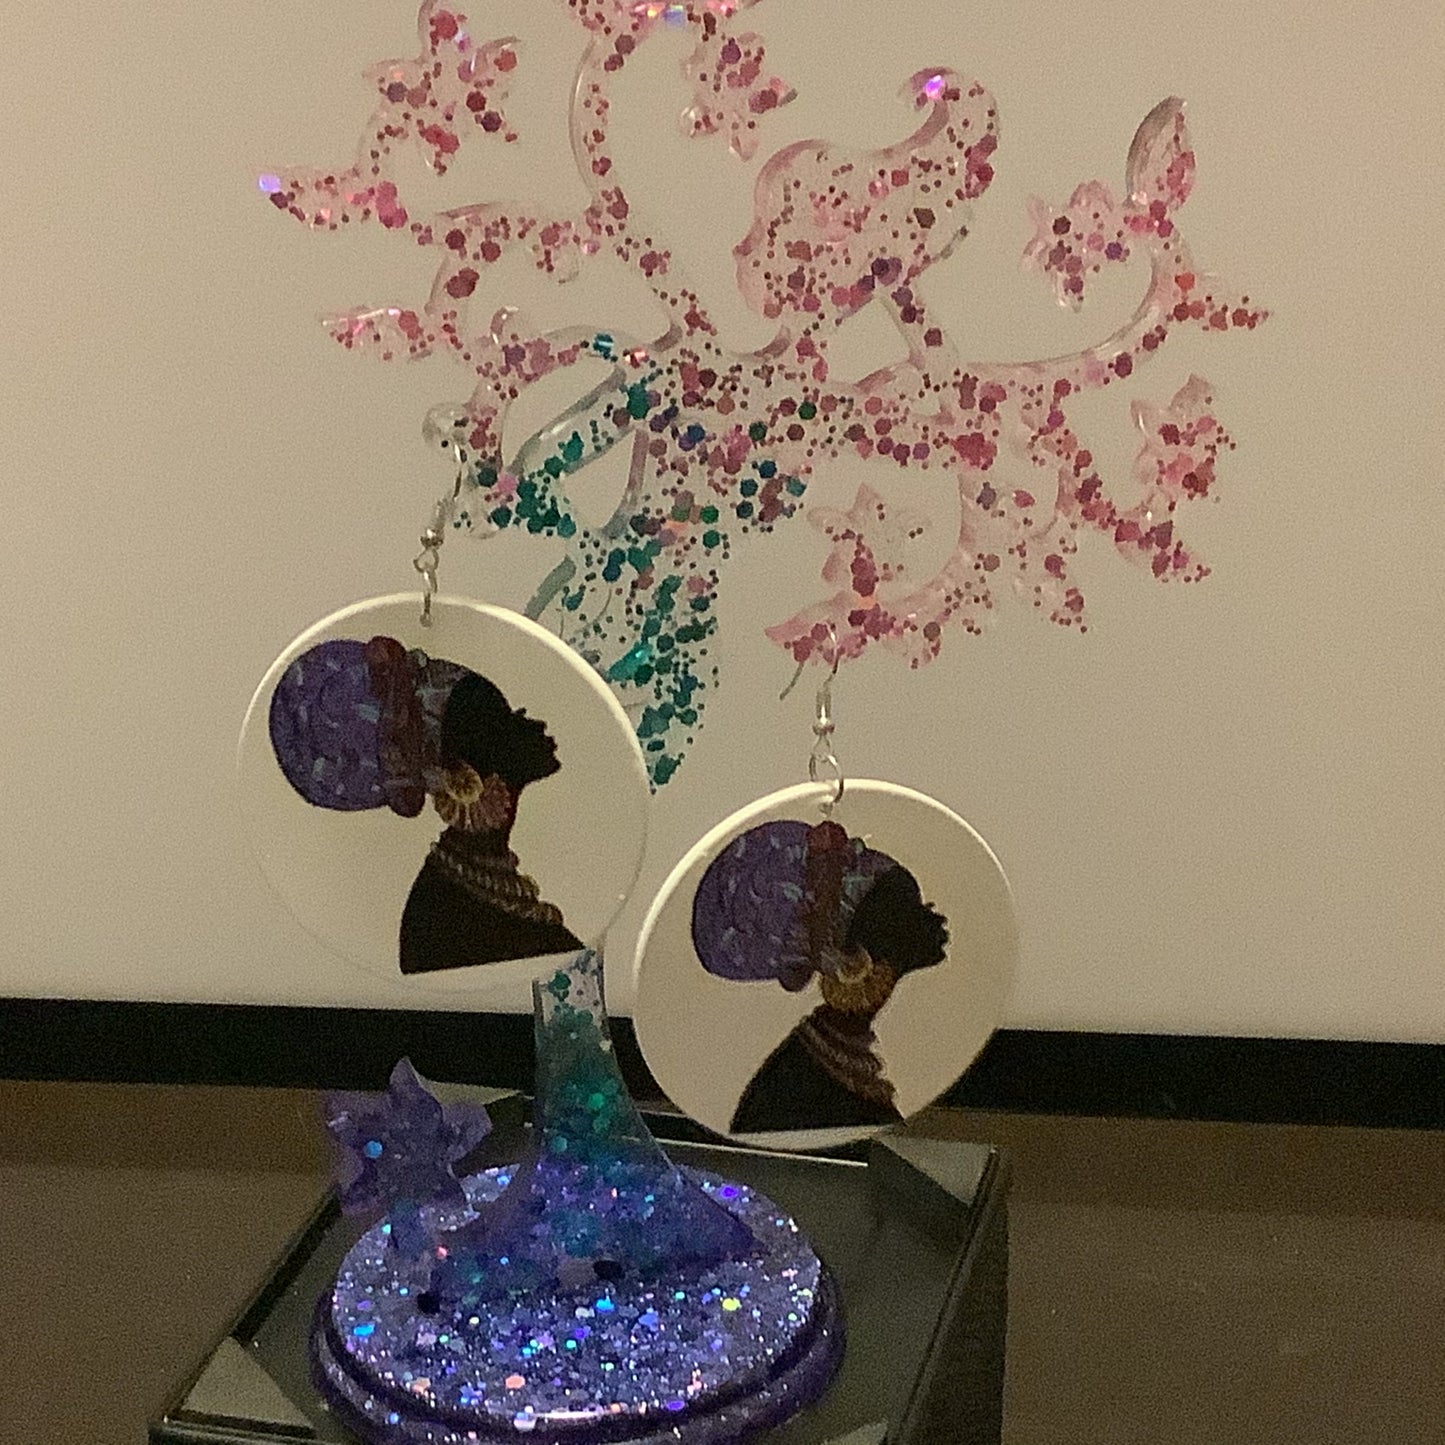 Fairy Earring Stand